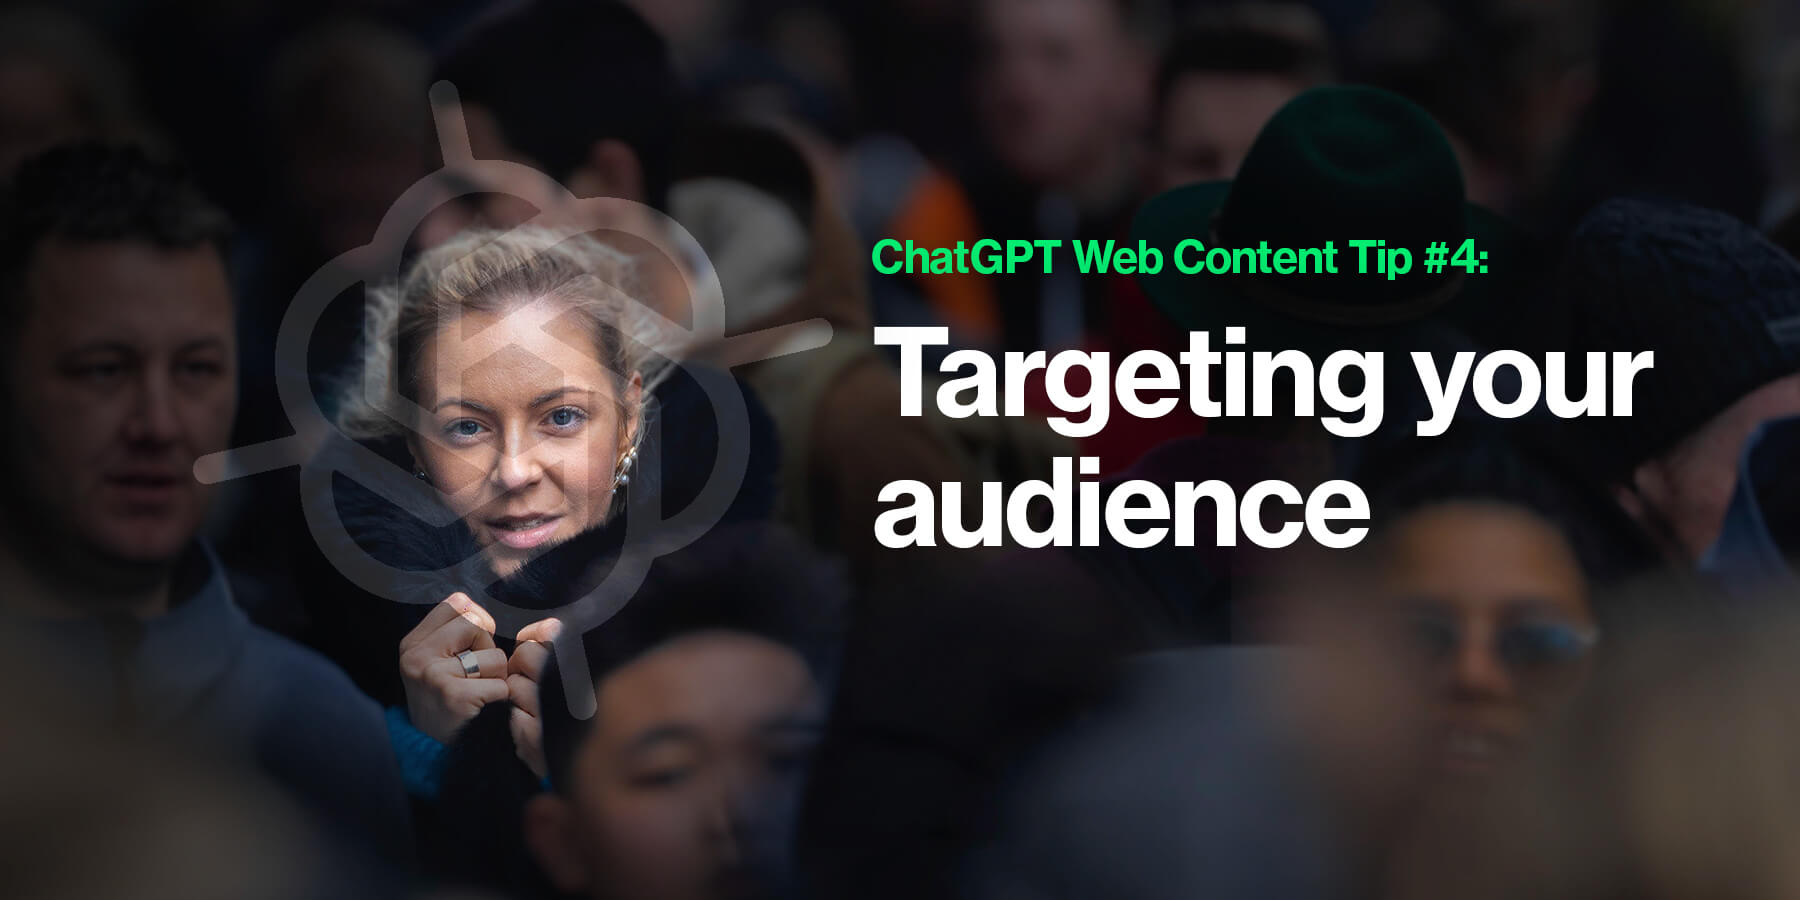 ChatGPT Web Content Tip #4: Targeting your audience